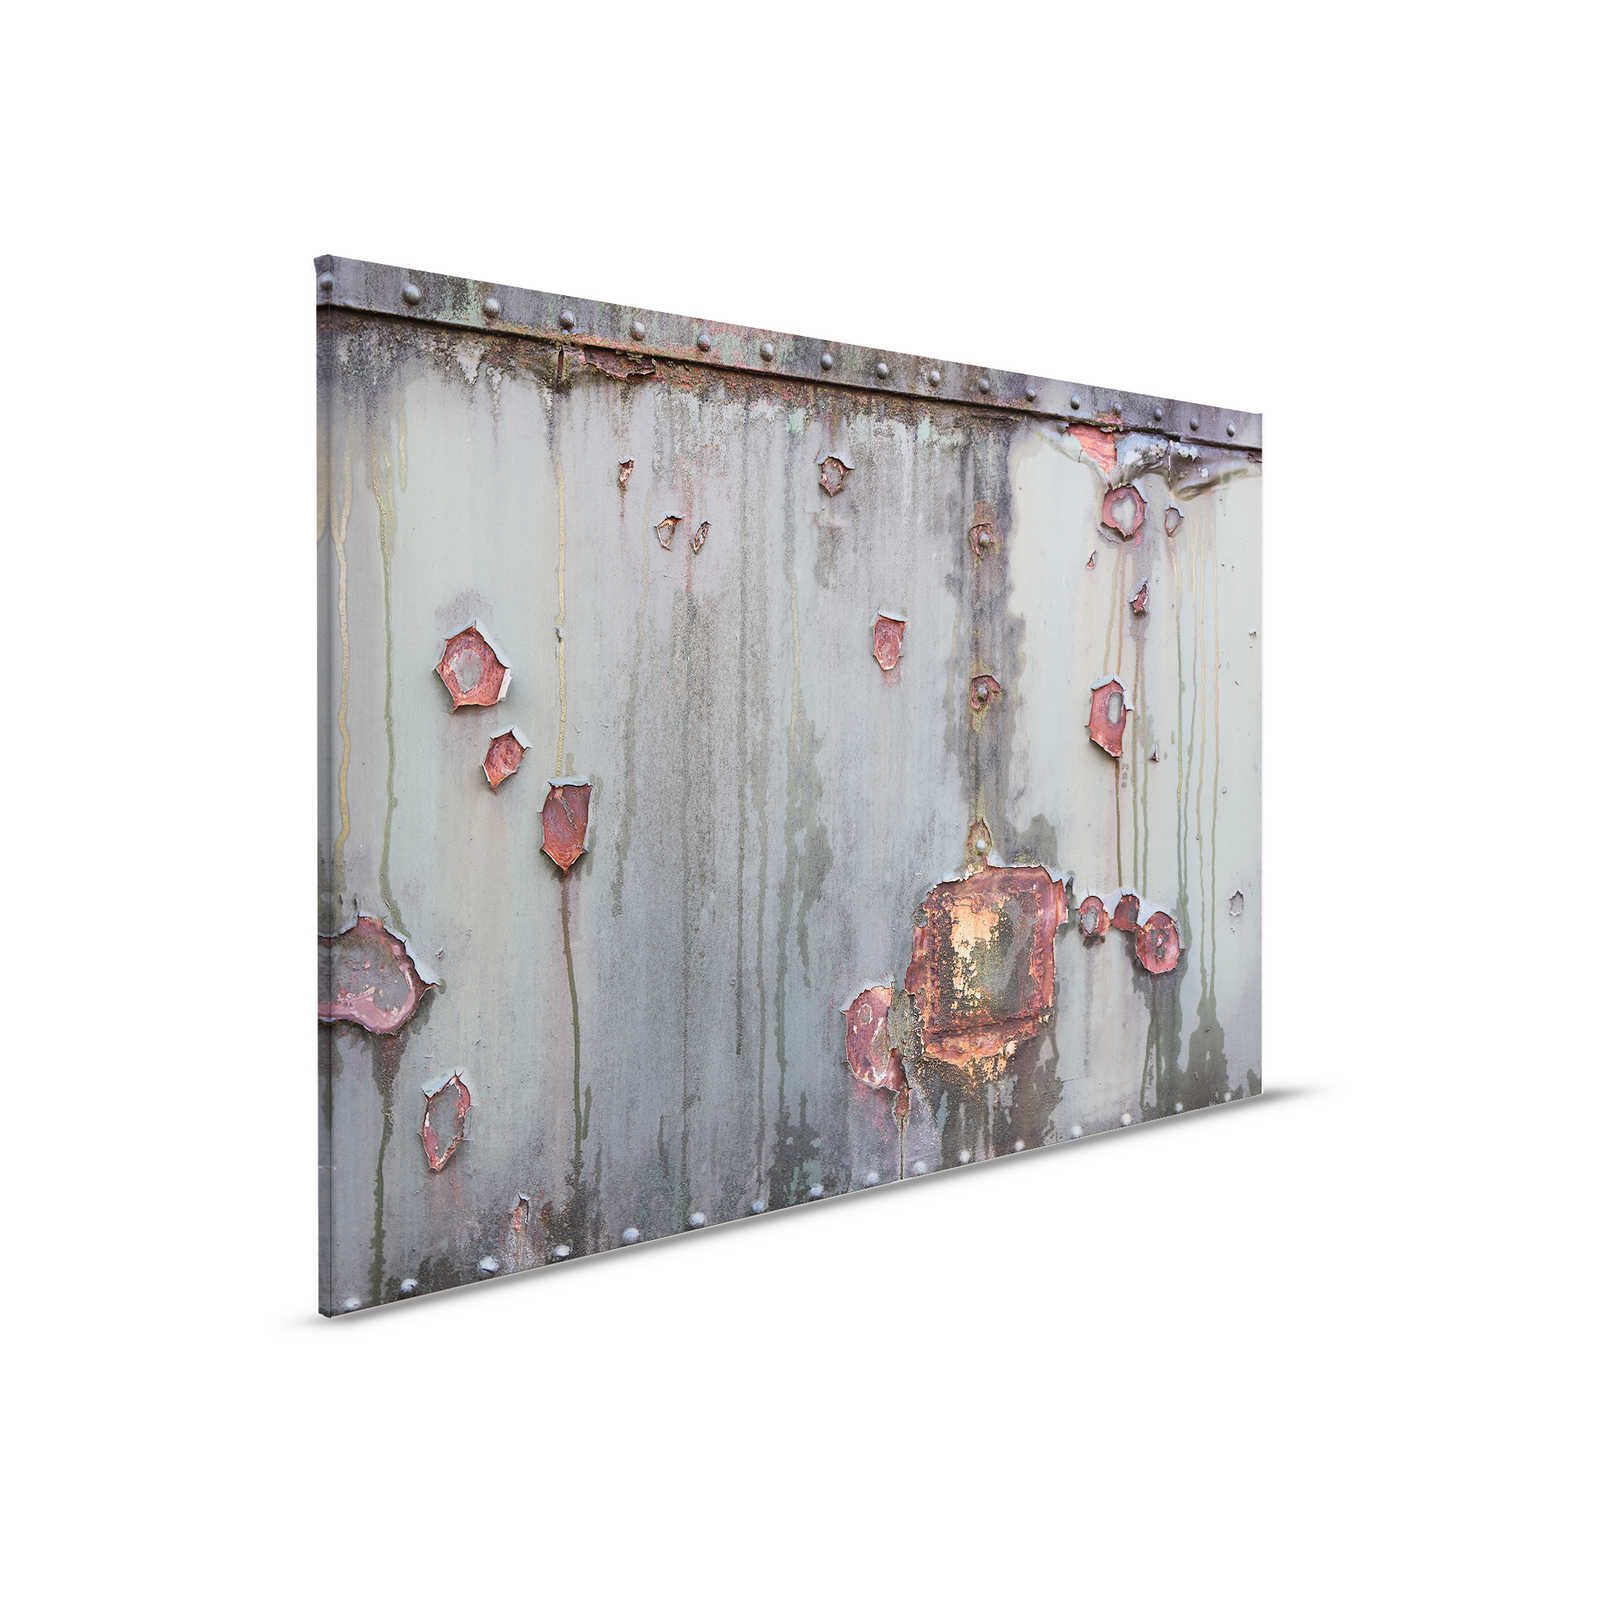         Metal Wall - Canvas painting Industrial with Rust & Used Look - 0.90 m x 0.60 m
    